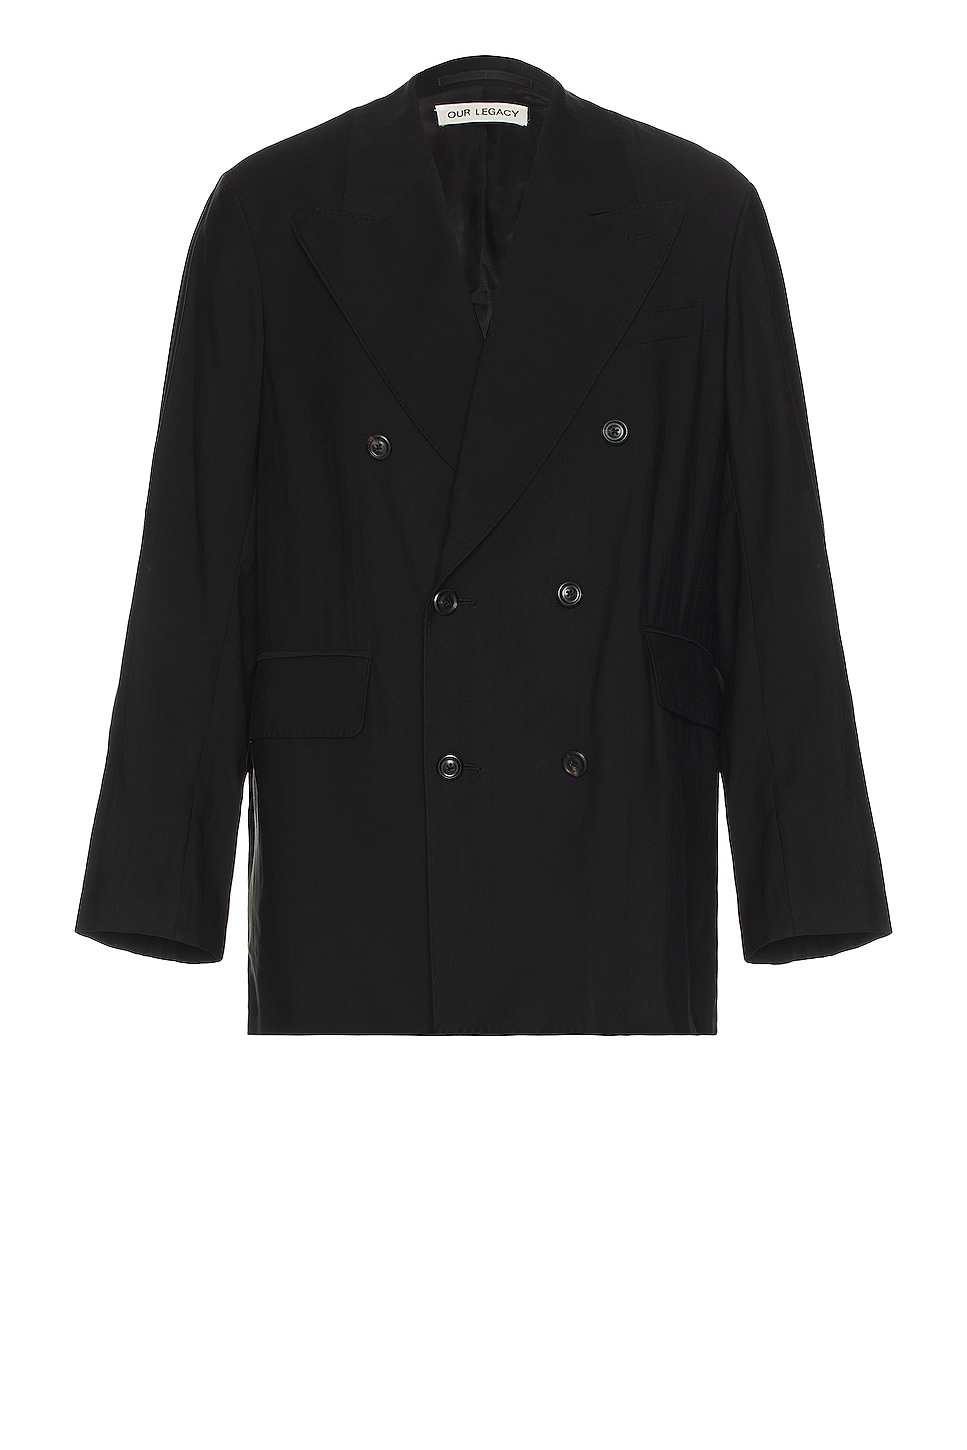 Image 1 of Our Legacy Sharp Db Blazer in Black Experienced